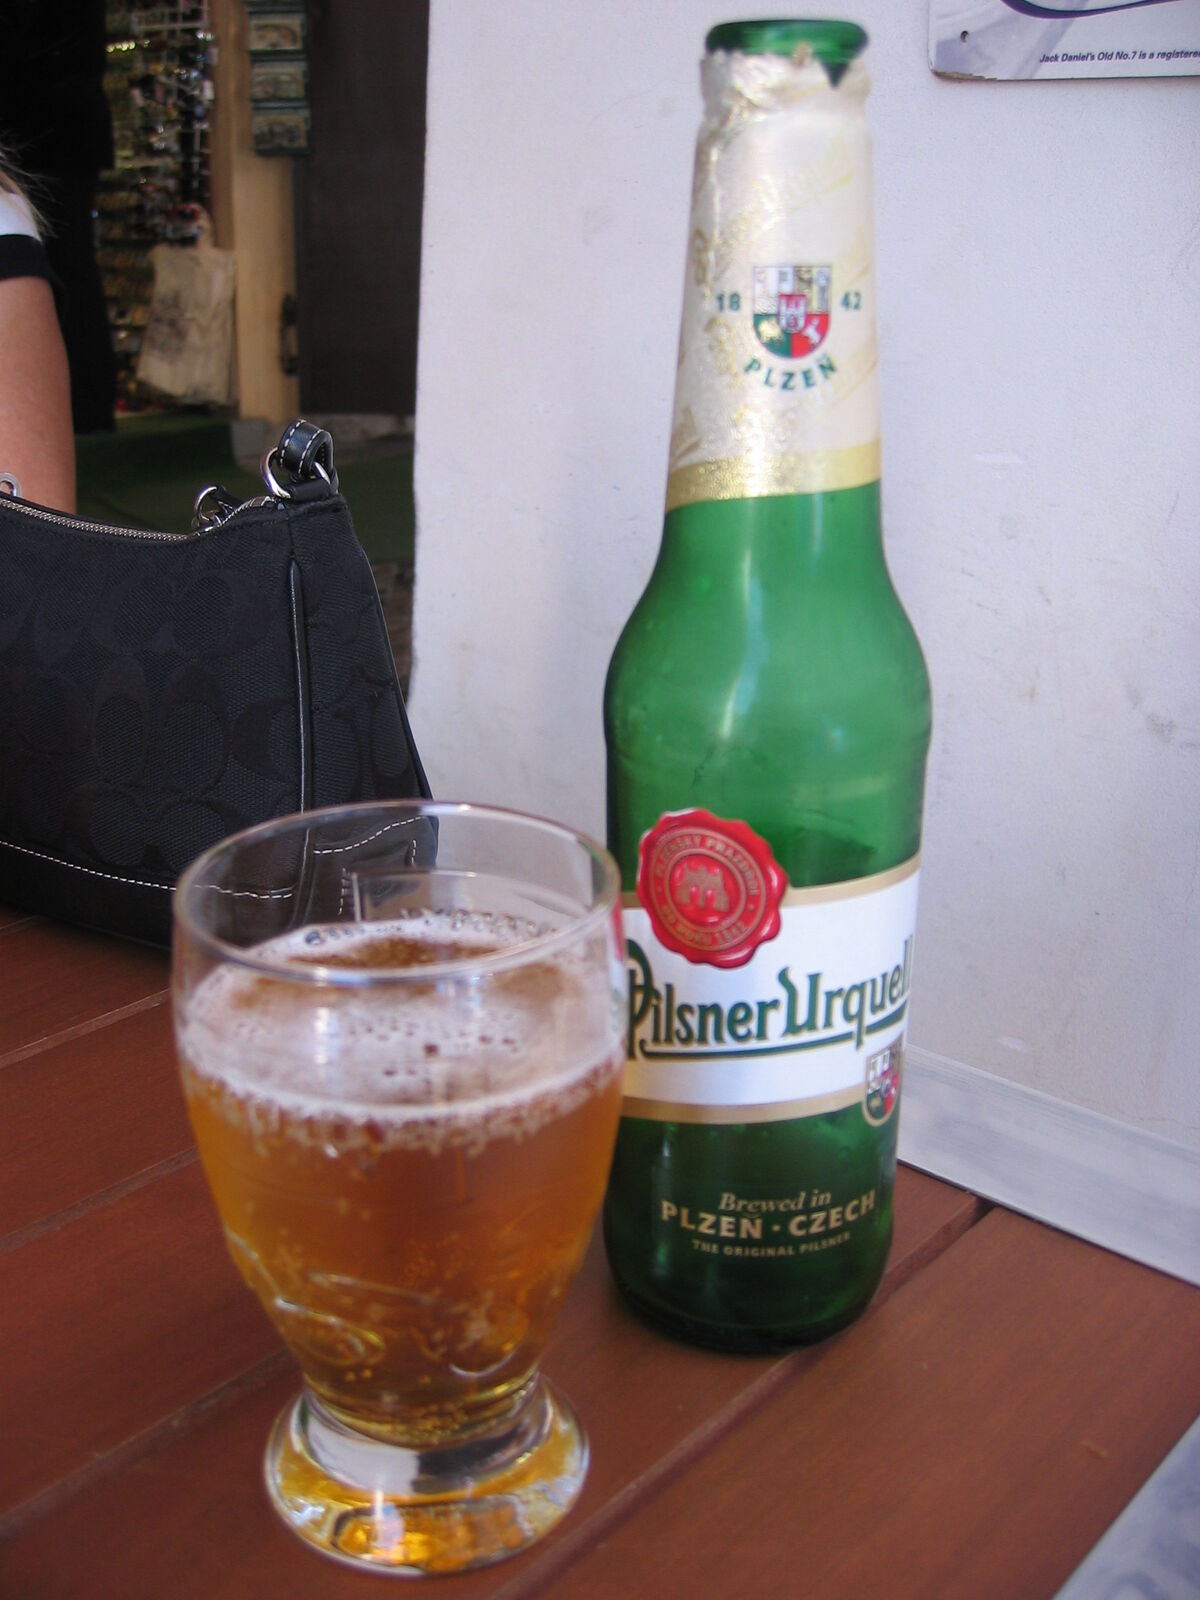 https://static.wikia.nocookie.net/beer/images/8/82/Pilsner_Urquell_2.JPG/revision/latest/scale-to-width-down/1200?cb=20080627031209